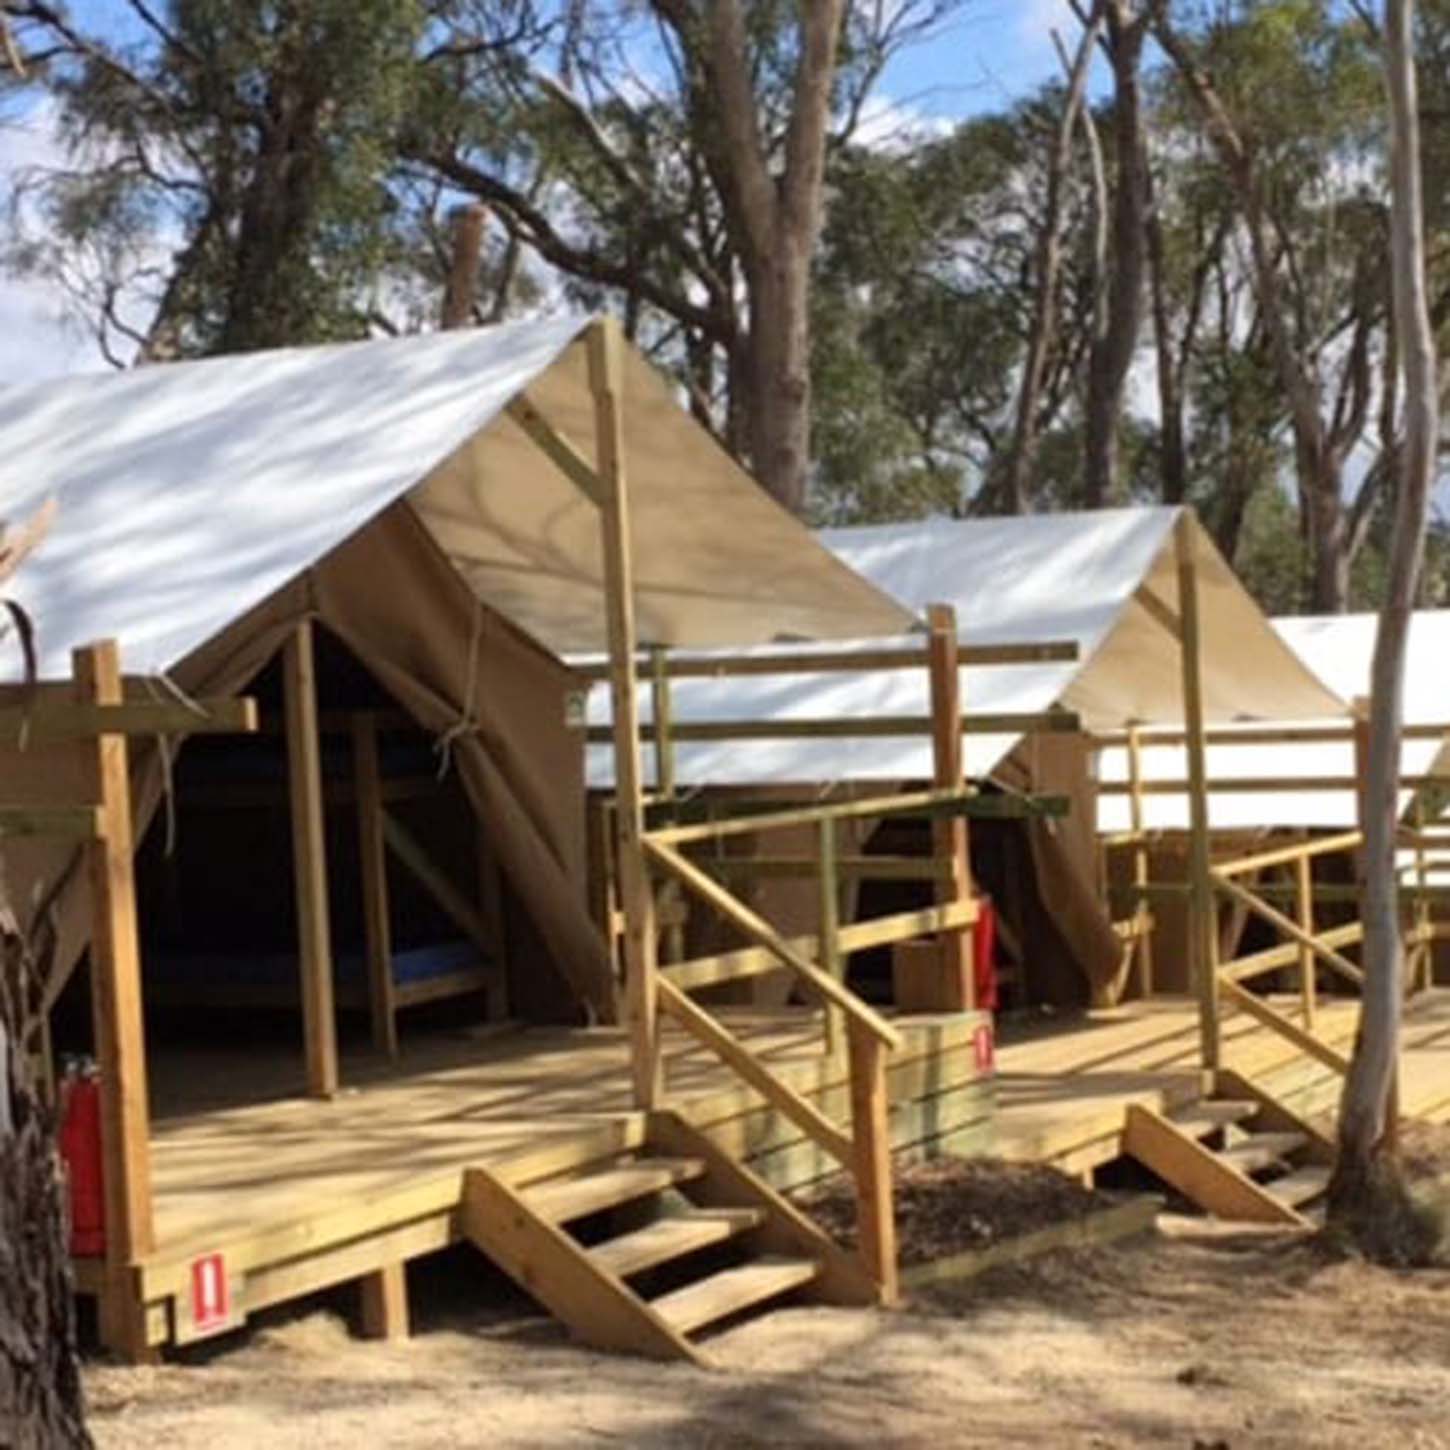 Glamping tents with wooden platforms set up among trees, equipped with staircases and covered with white canvas.